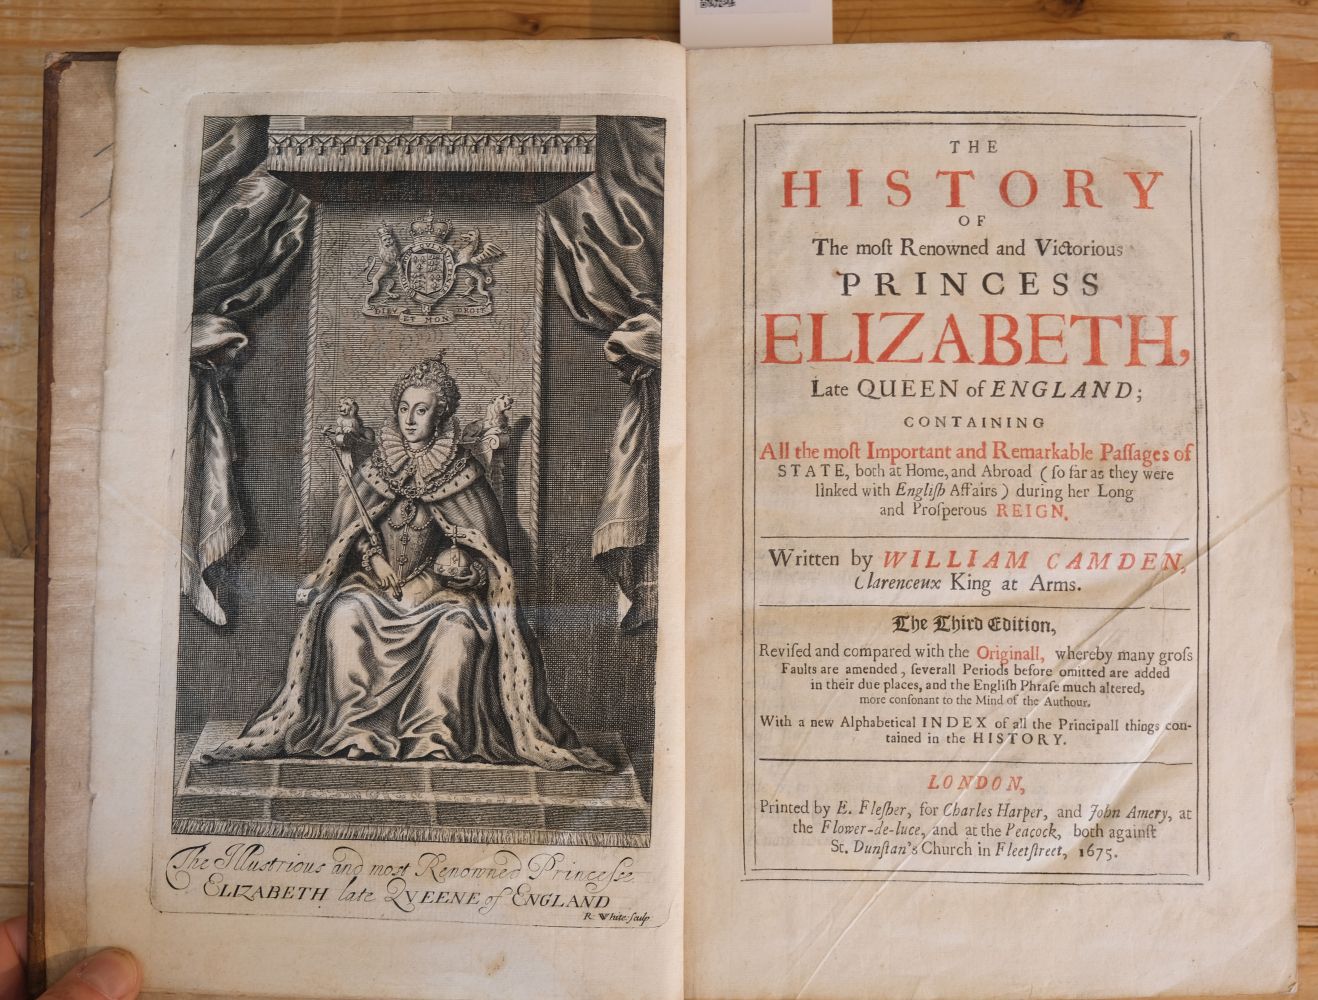 Camden (William). The History of the most Renowned and Victorious Princess Elizabeth, 3rd ed., 1675 - Image 2 of 2